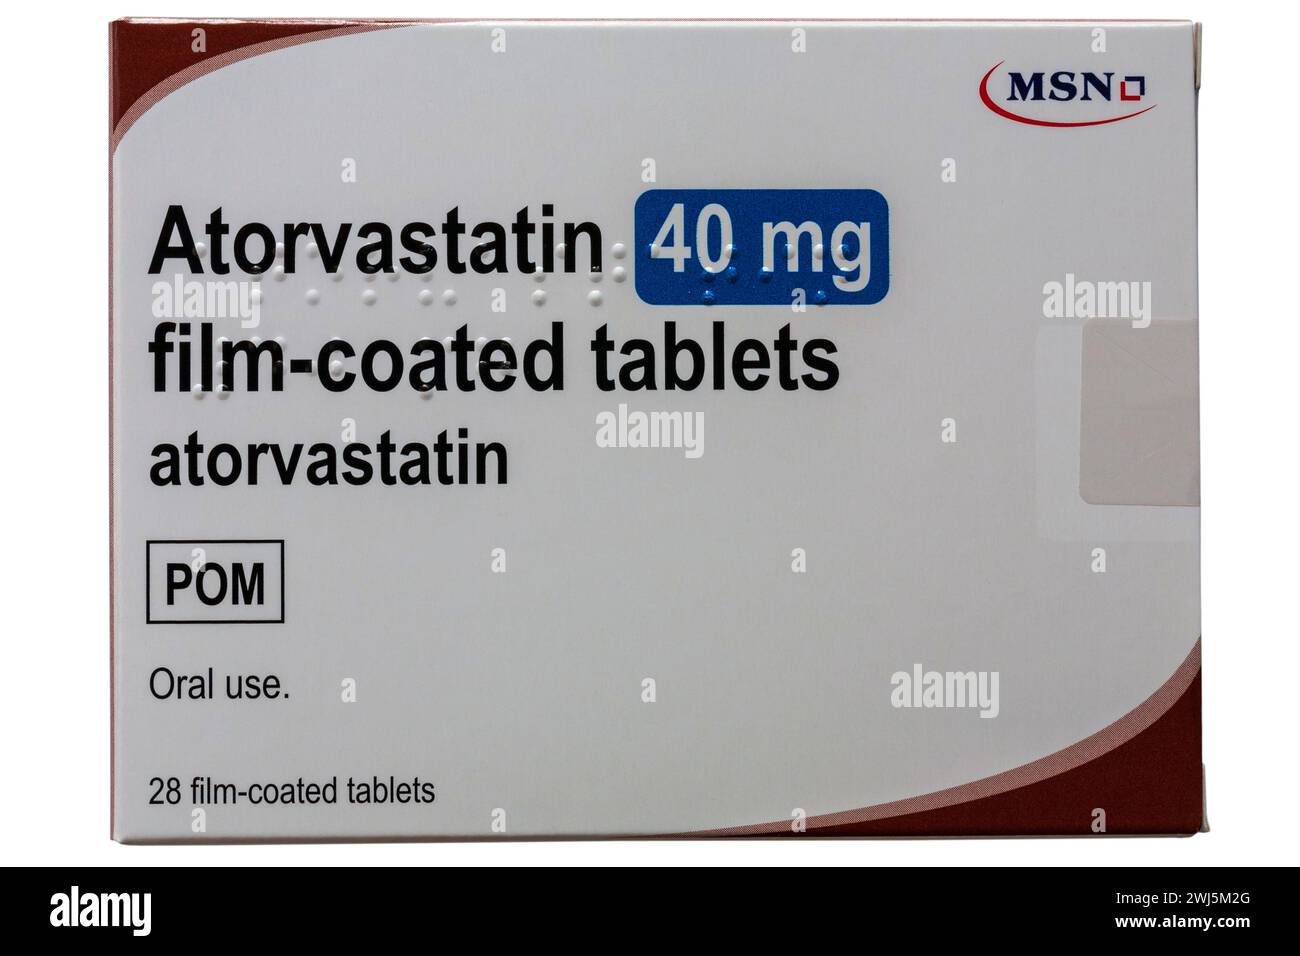 Packet of Atorvastatin film-coated tablets statins pack 40 mg isolated on white background Stock Photo